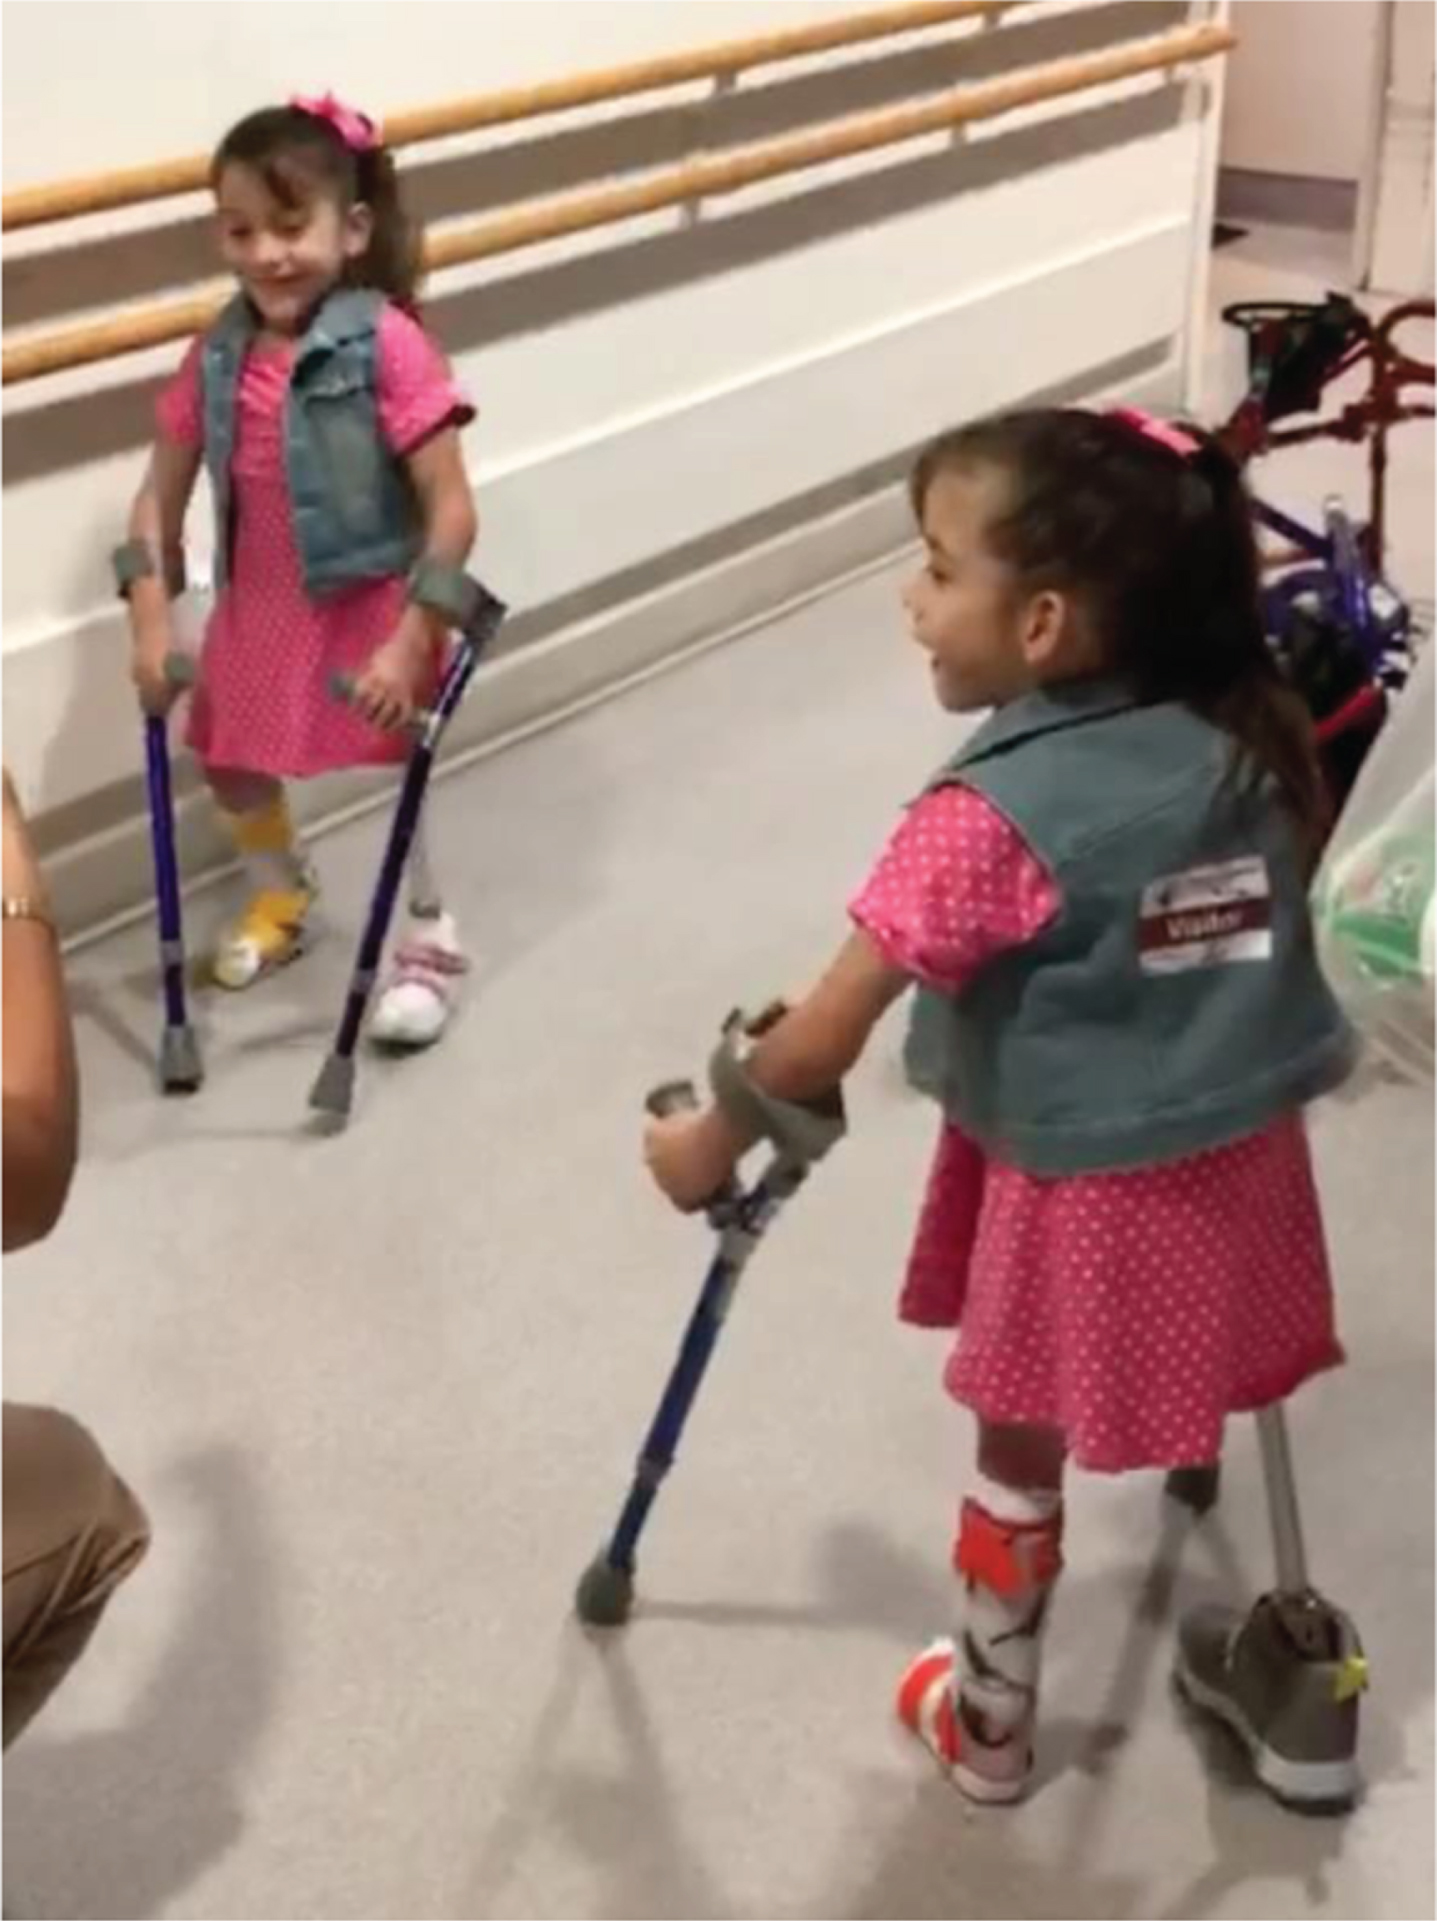 After several years with a walker, the twins progressed to using Lofstrand crutches. (Written photo consents obtained.).